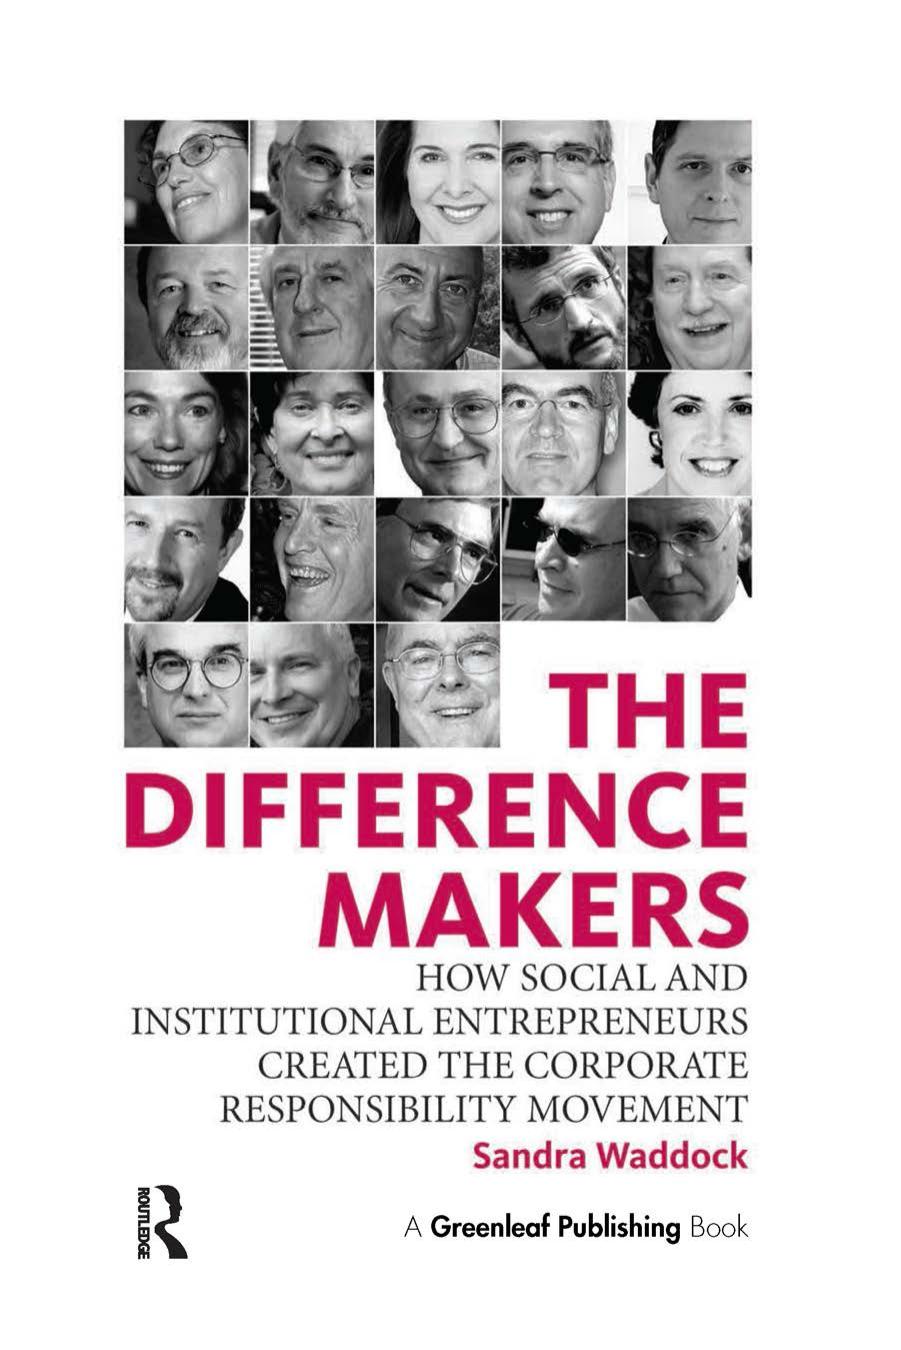 The Difference Makers : How Social and Institutional Entrepreneurs Created the Corporate Responsibility Movement by Sandra Waddock